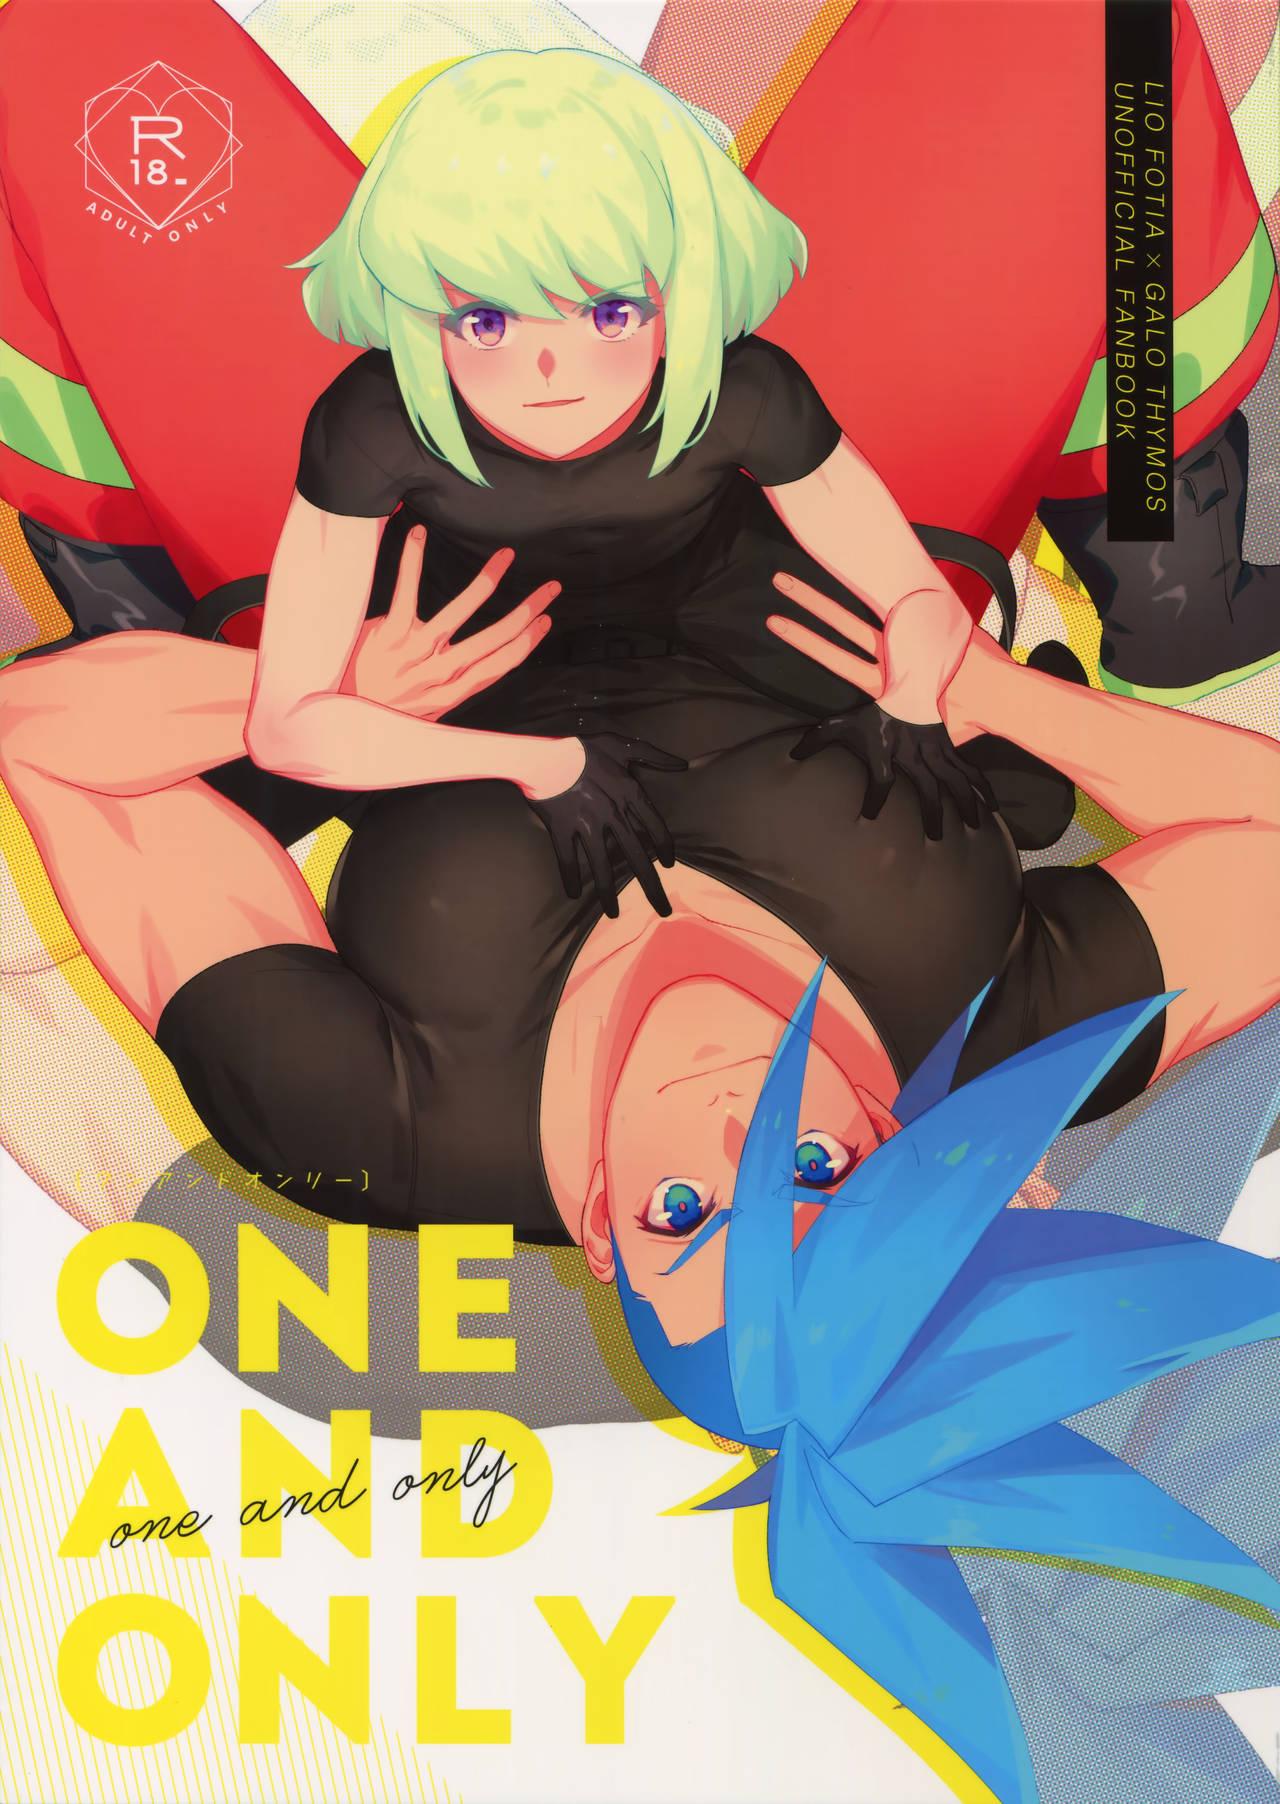 Home One and Only - Promare Amatoriale - Page 1